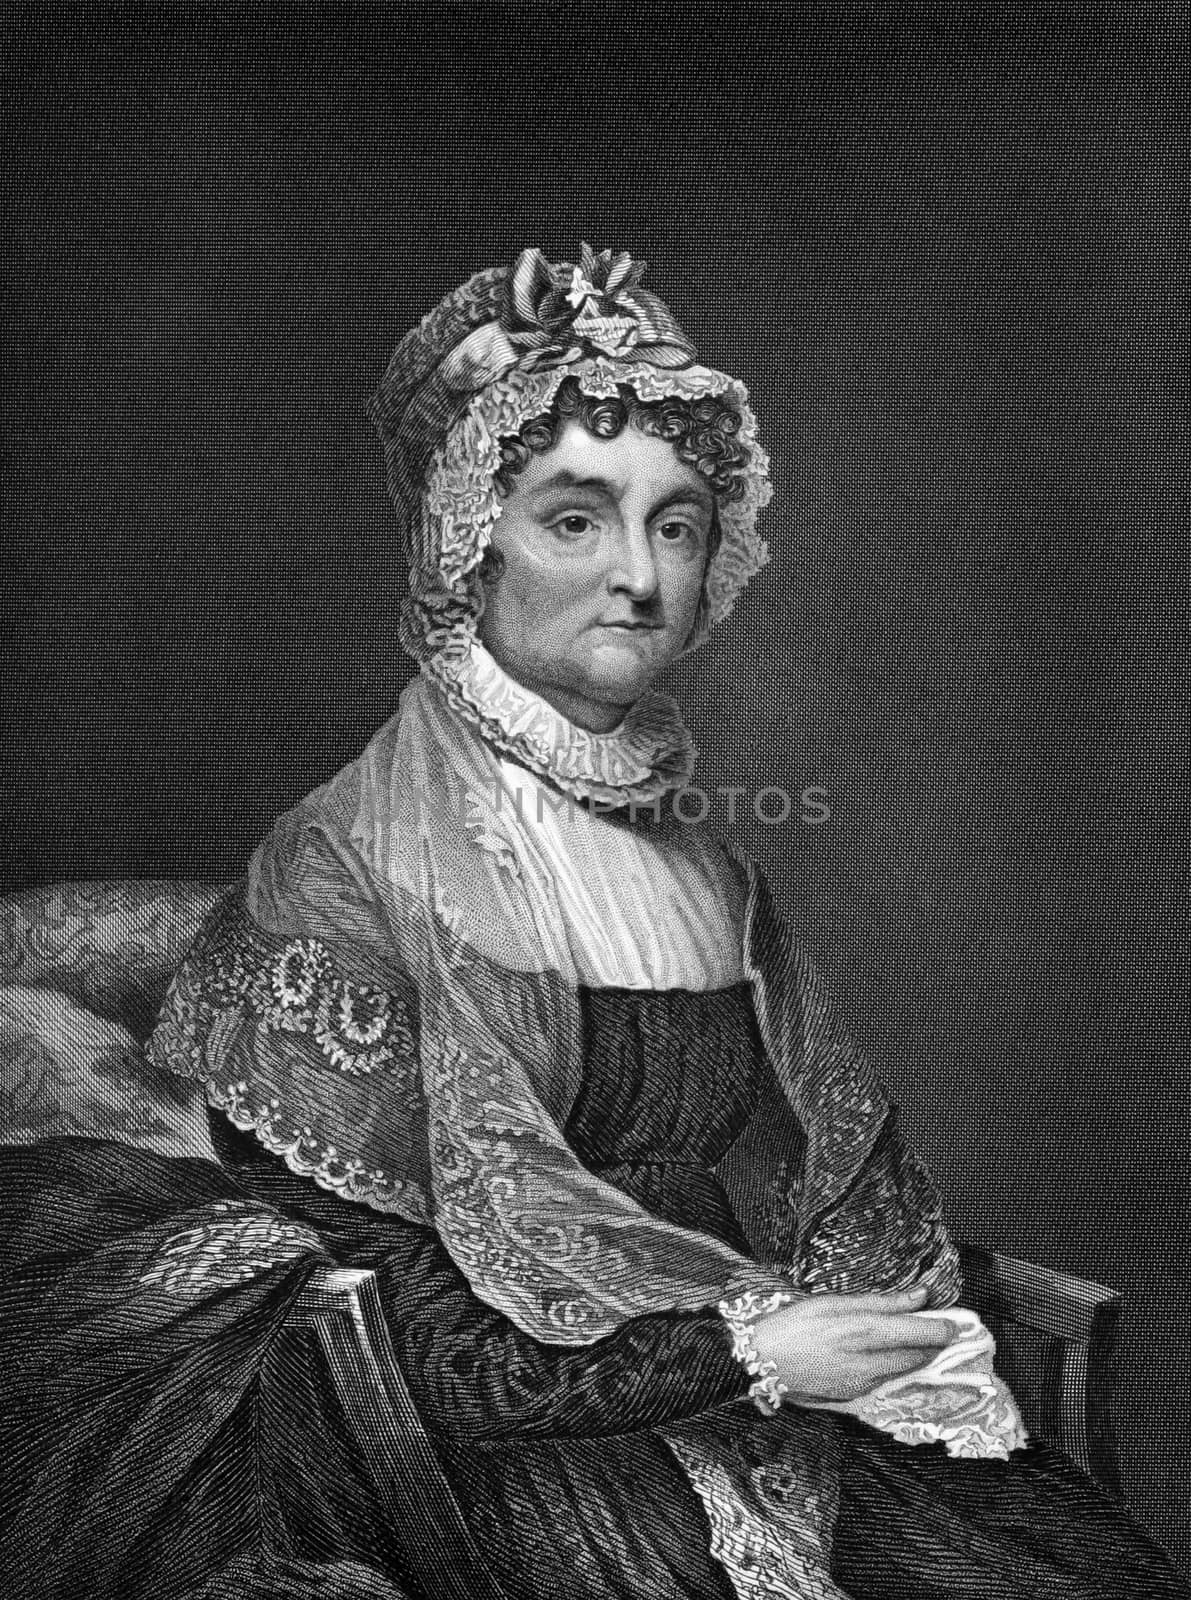 Abigail Adams (1712-1786) on engraving from 1873. Wife of John Adams president of the USA. Engraved by unknown artist and published in ''Portrait Gallery of Eminent Men and Women with Biographies'',USA,1873.